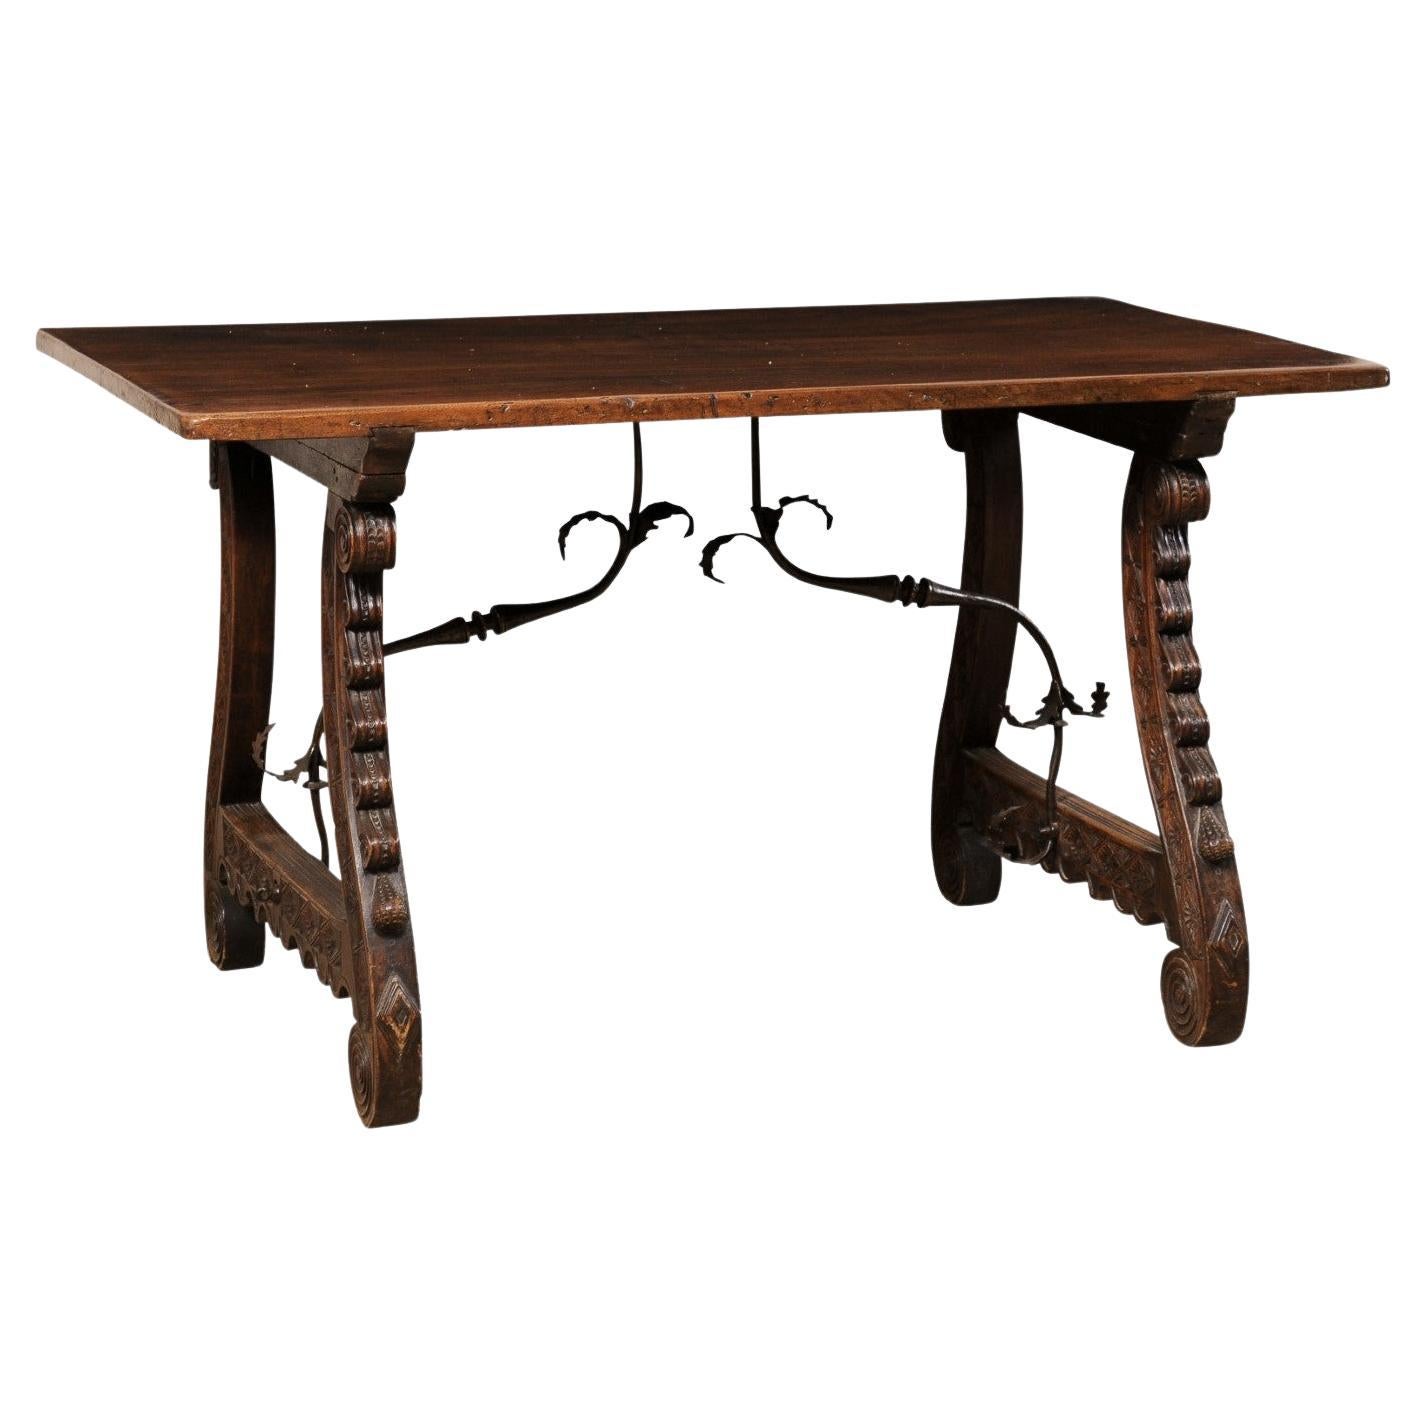 18th C. Italian Table w/Carved-Trestle Legs & Elegantly Forged Iron Stretchers